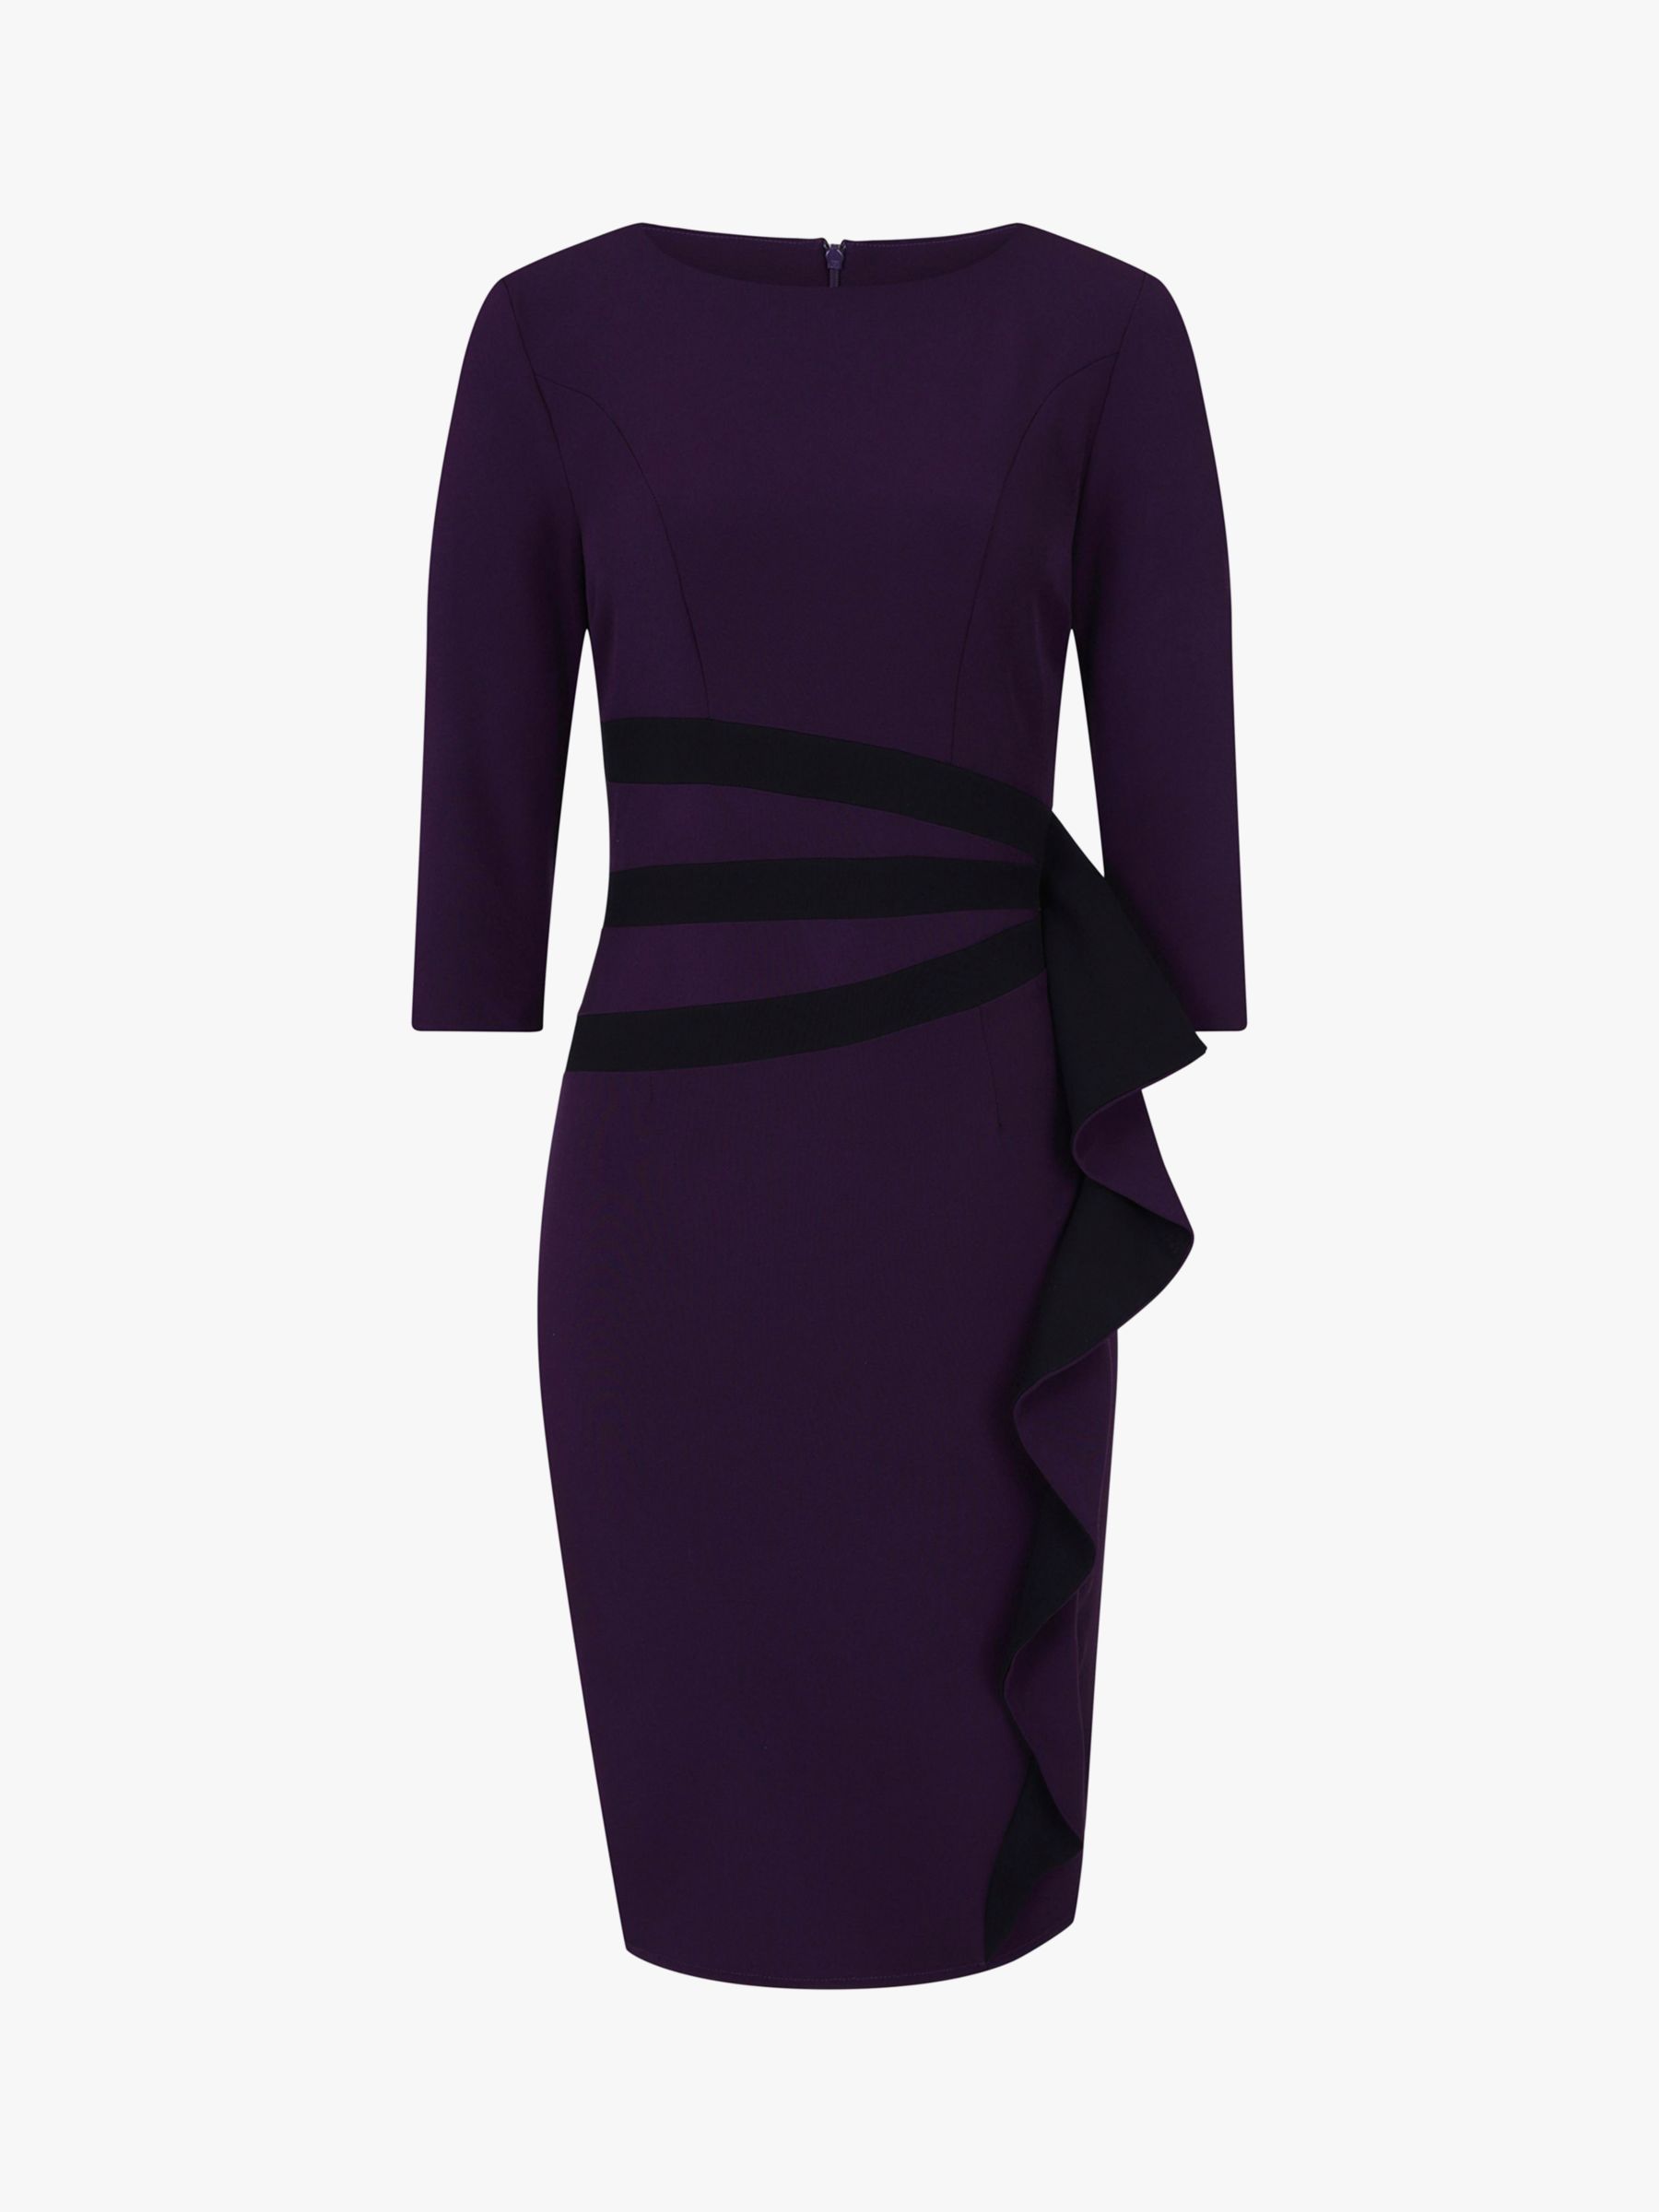 Buy HotSquash Frill Detail Bodycon Dress Online at johnlewis.com